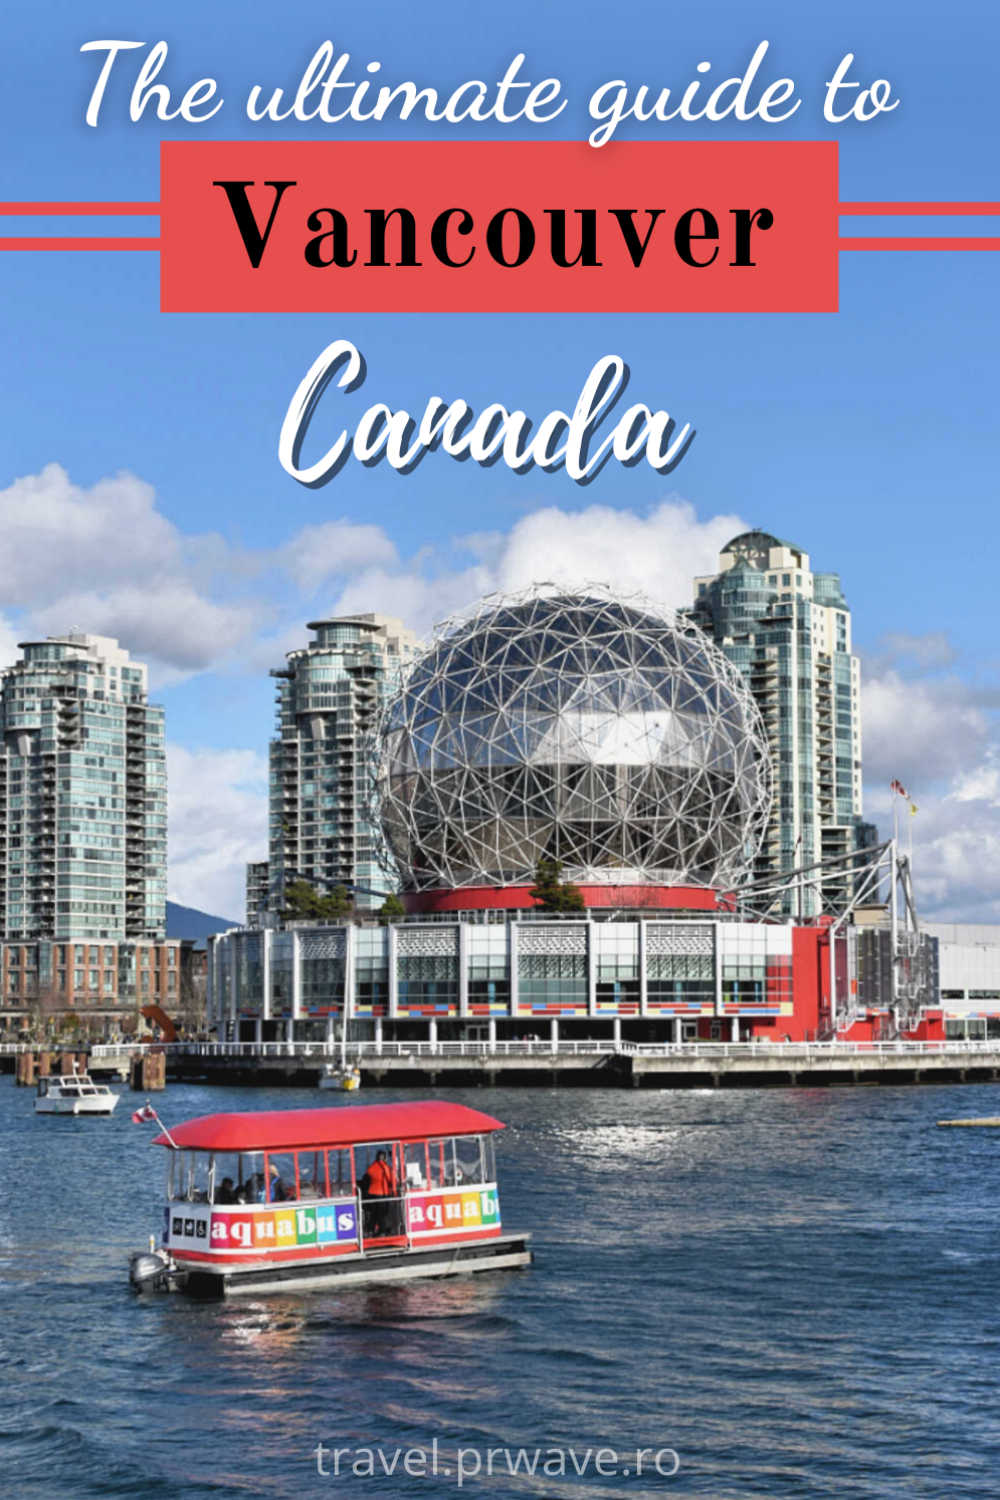 The Ultimate Guide To Visiting Vancouver, Canada. Insider tips for vancouver, including the best things to do in Vancouver, Canada, are included in this article. #vancouver #canada #vancouverthingstodo #northamerica #traveldestinations #vancouverguide